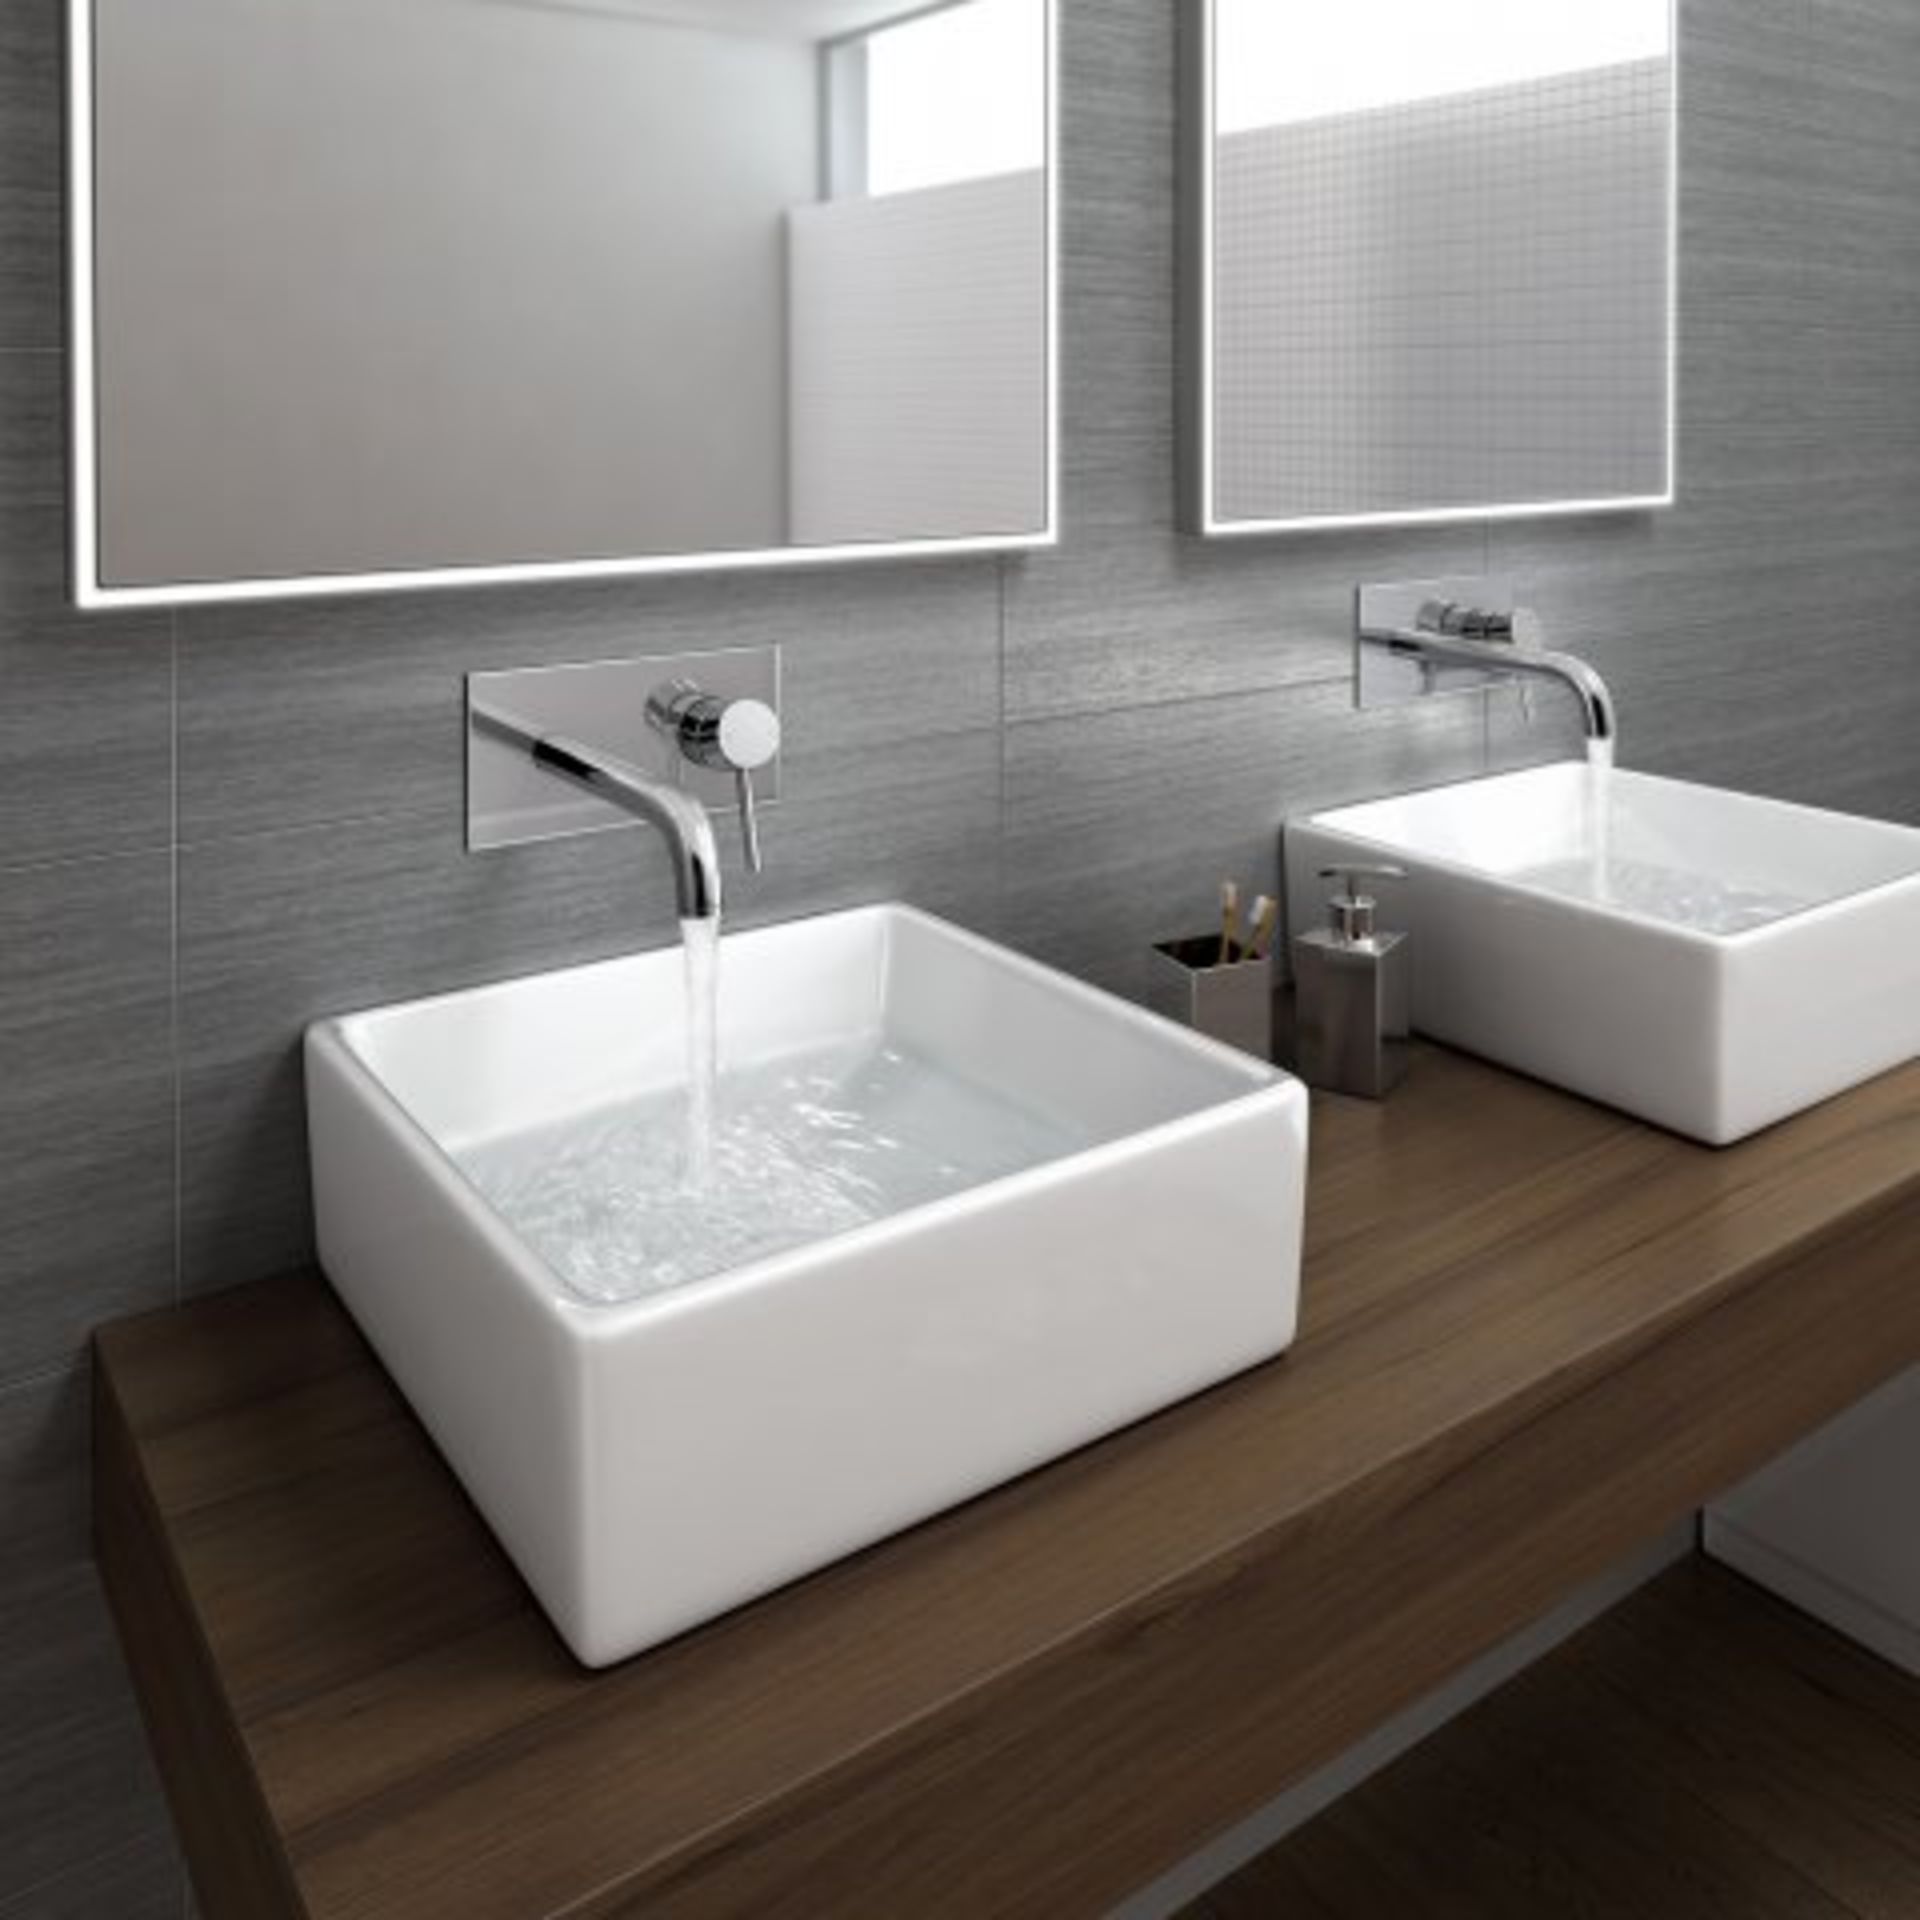 (I59) Gladstone Wall Mounted Basin Mixer Our Gladstone Range of taps are thoughtfully designed to - Image 2 of 3